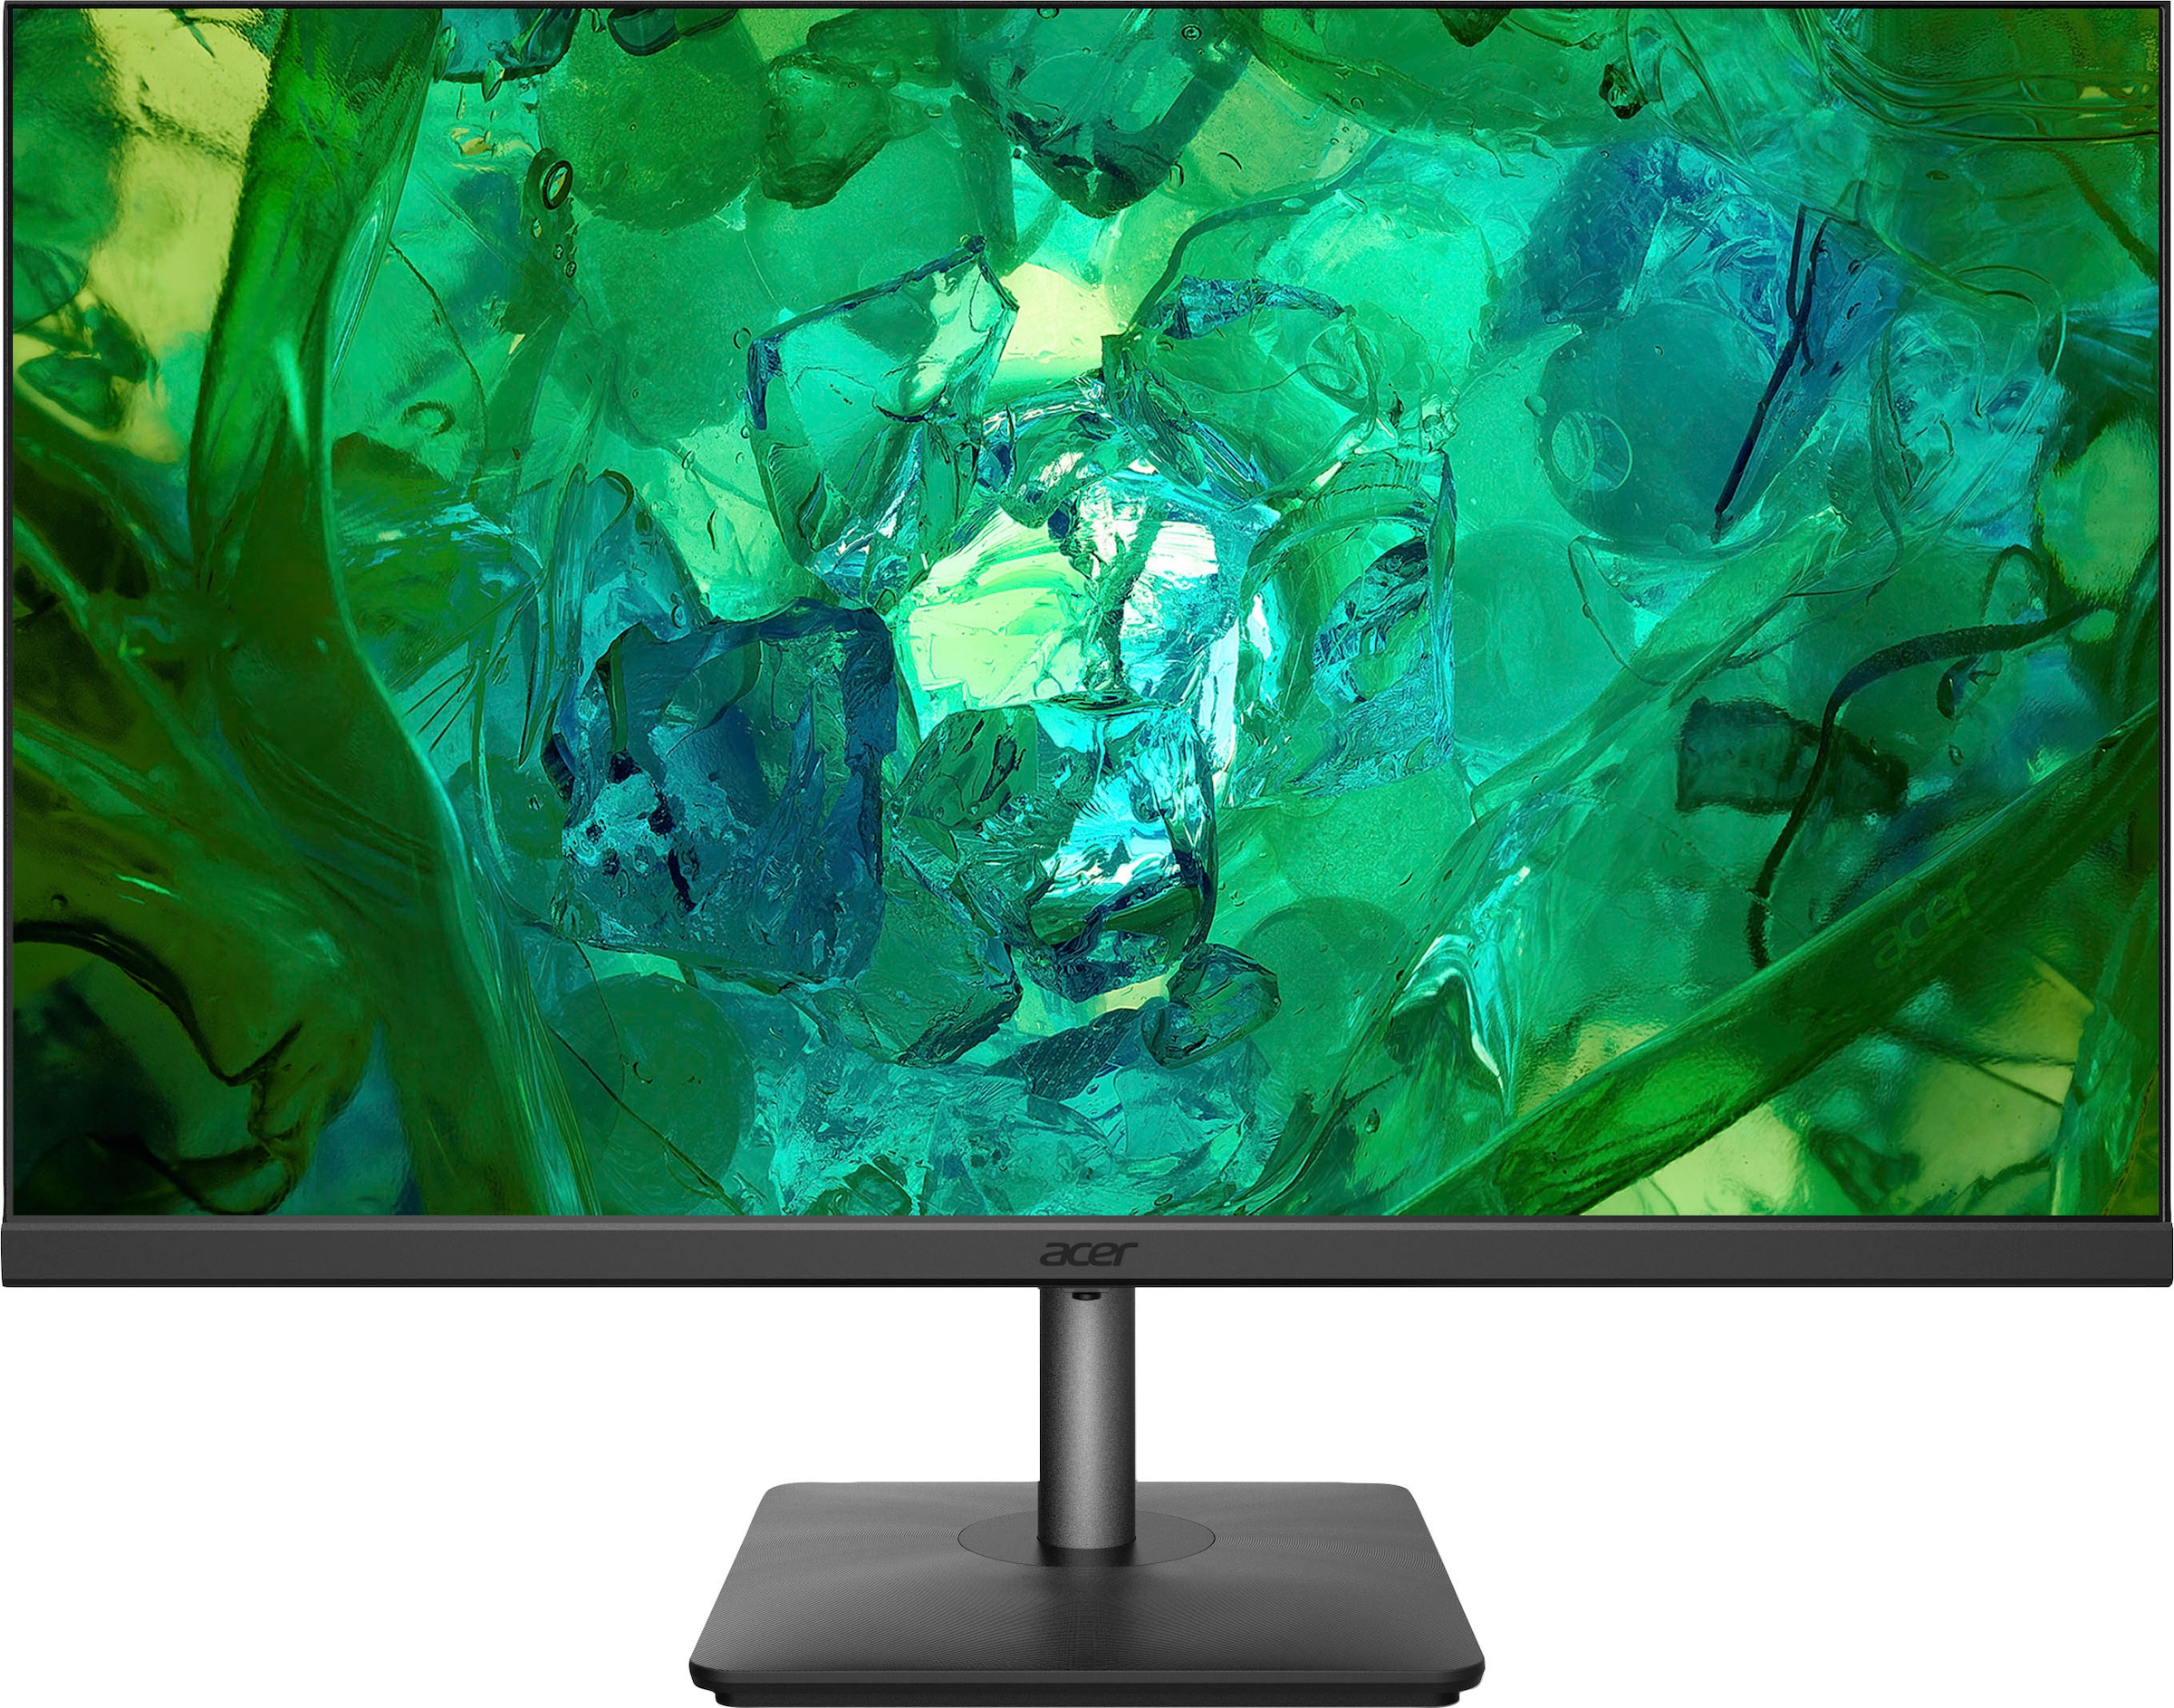 LED-Monitor »Vero RS272«, 69 cm/27 Zoll, 1920 x 1080 px, Full HD, 1 ms Reaktionszeit,...